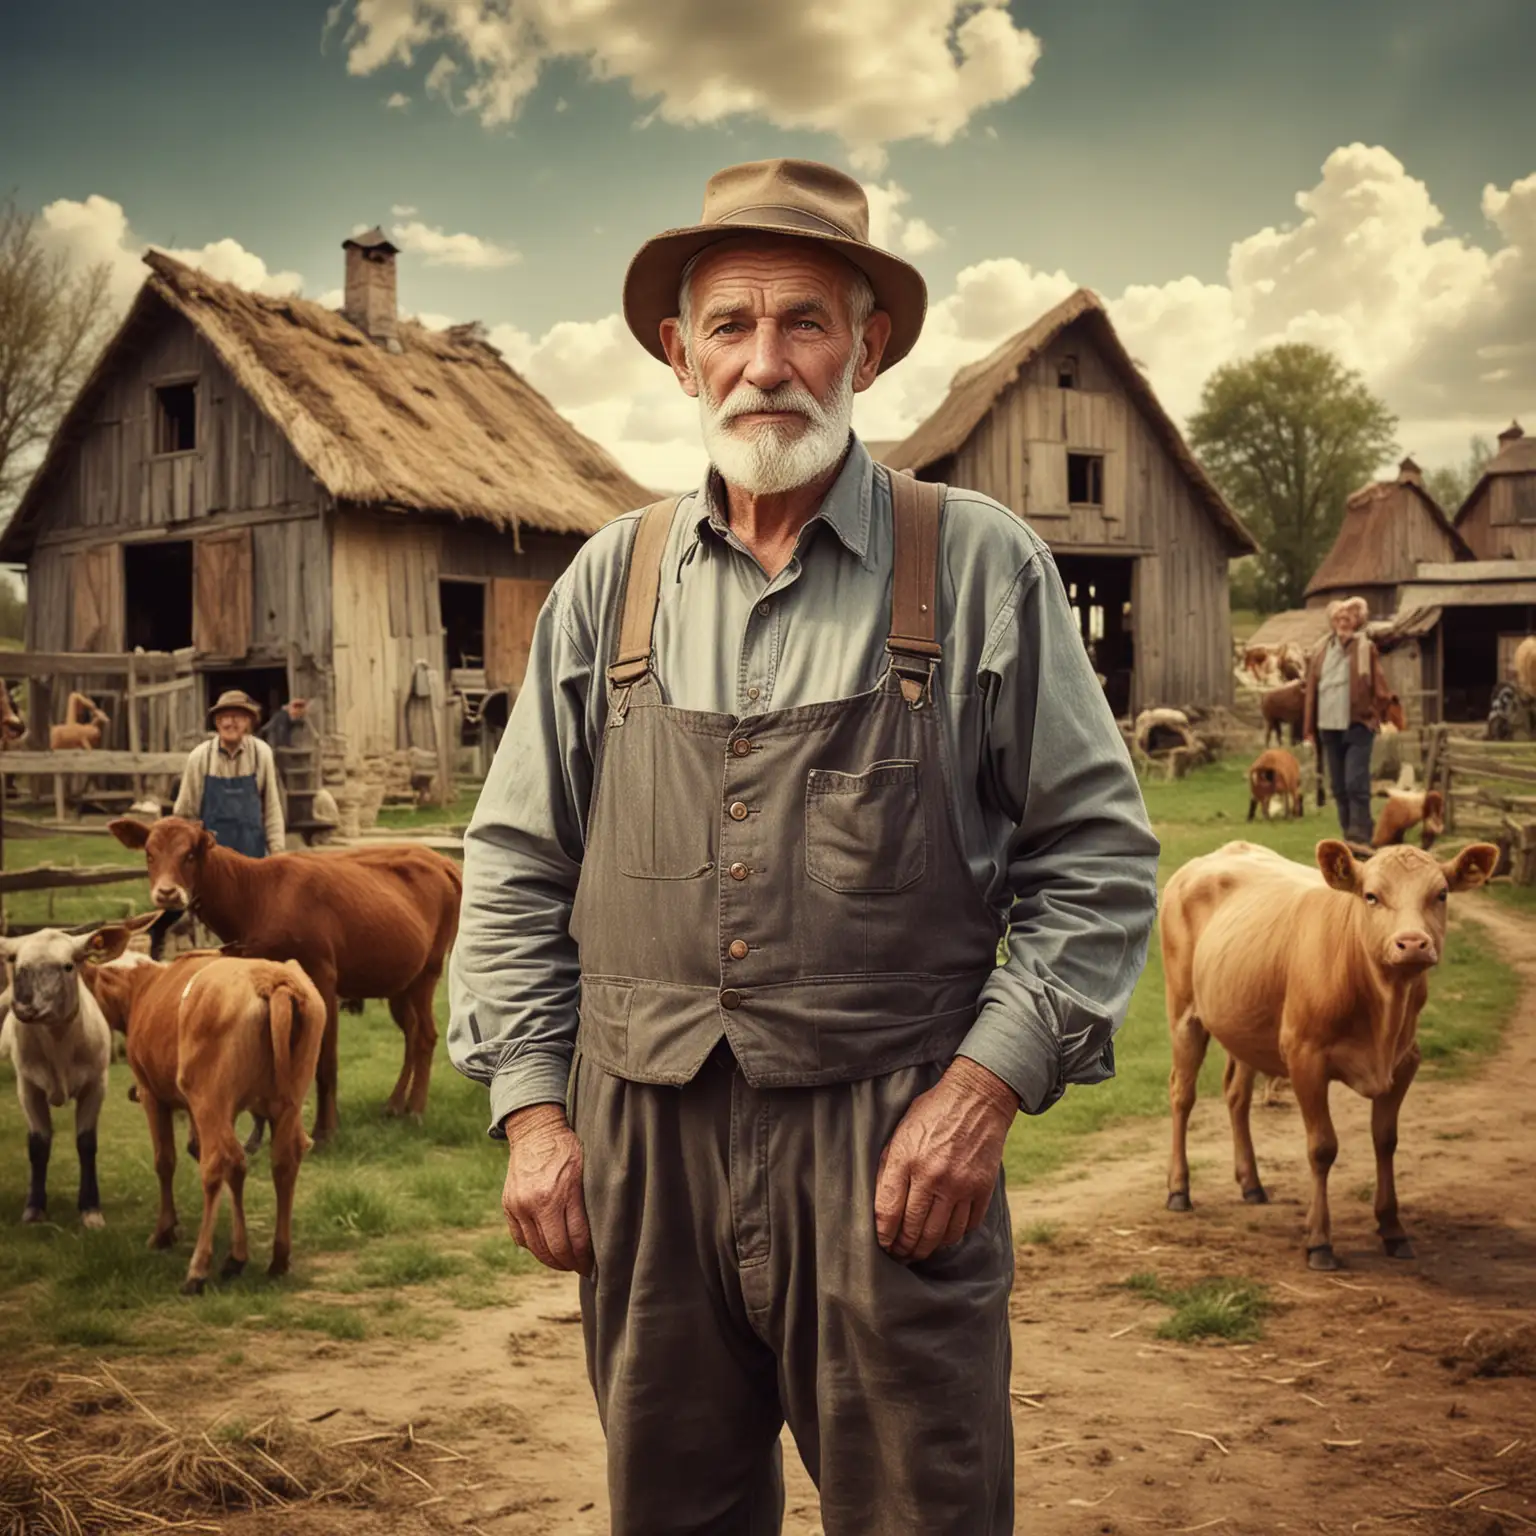 Vintage Old Man Farmer with Farm Buildings and Animals